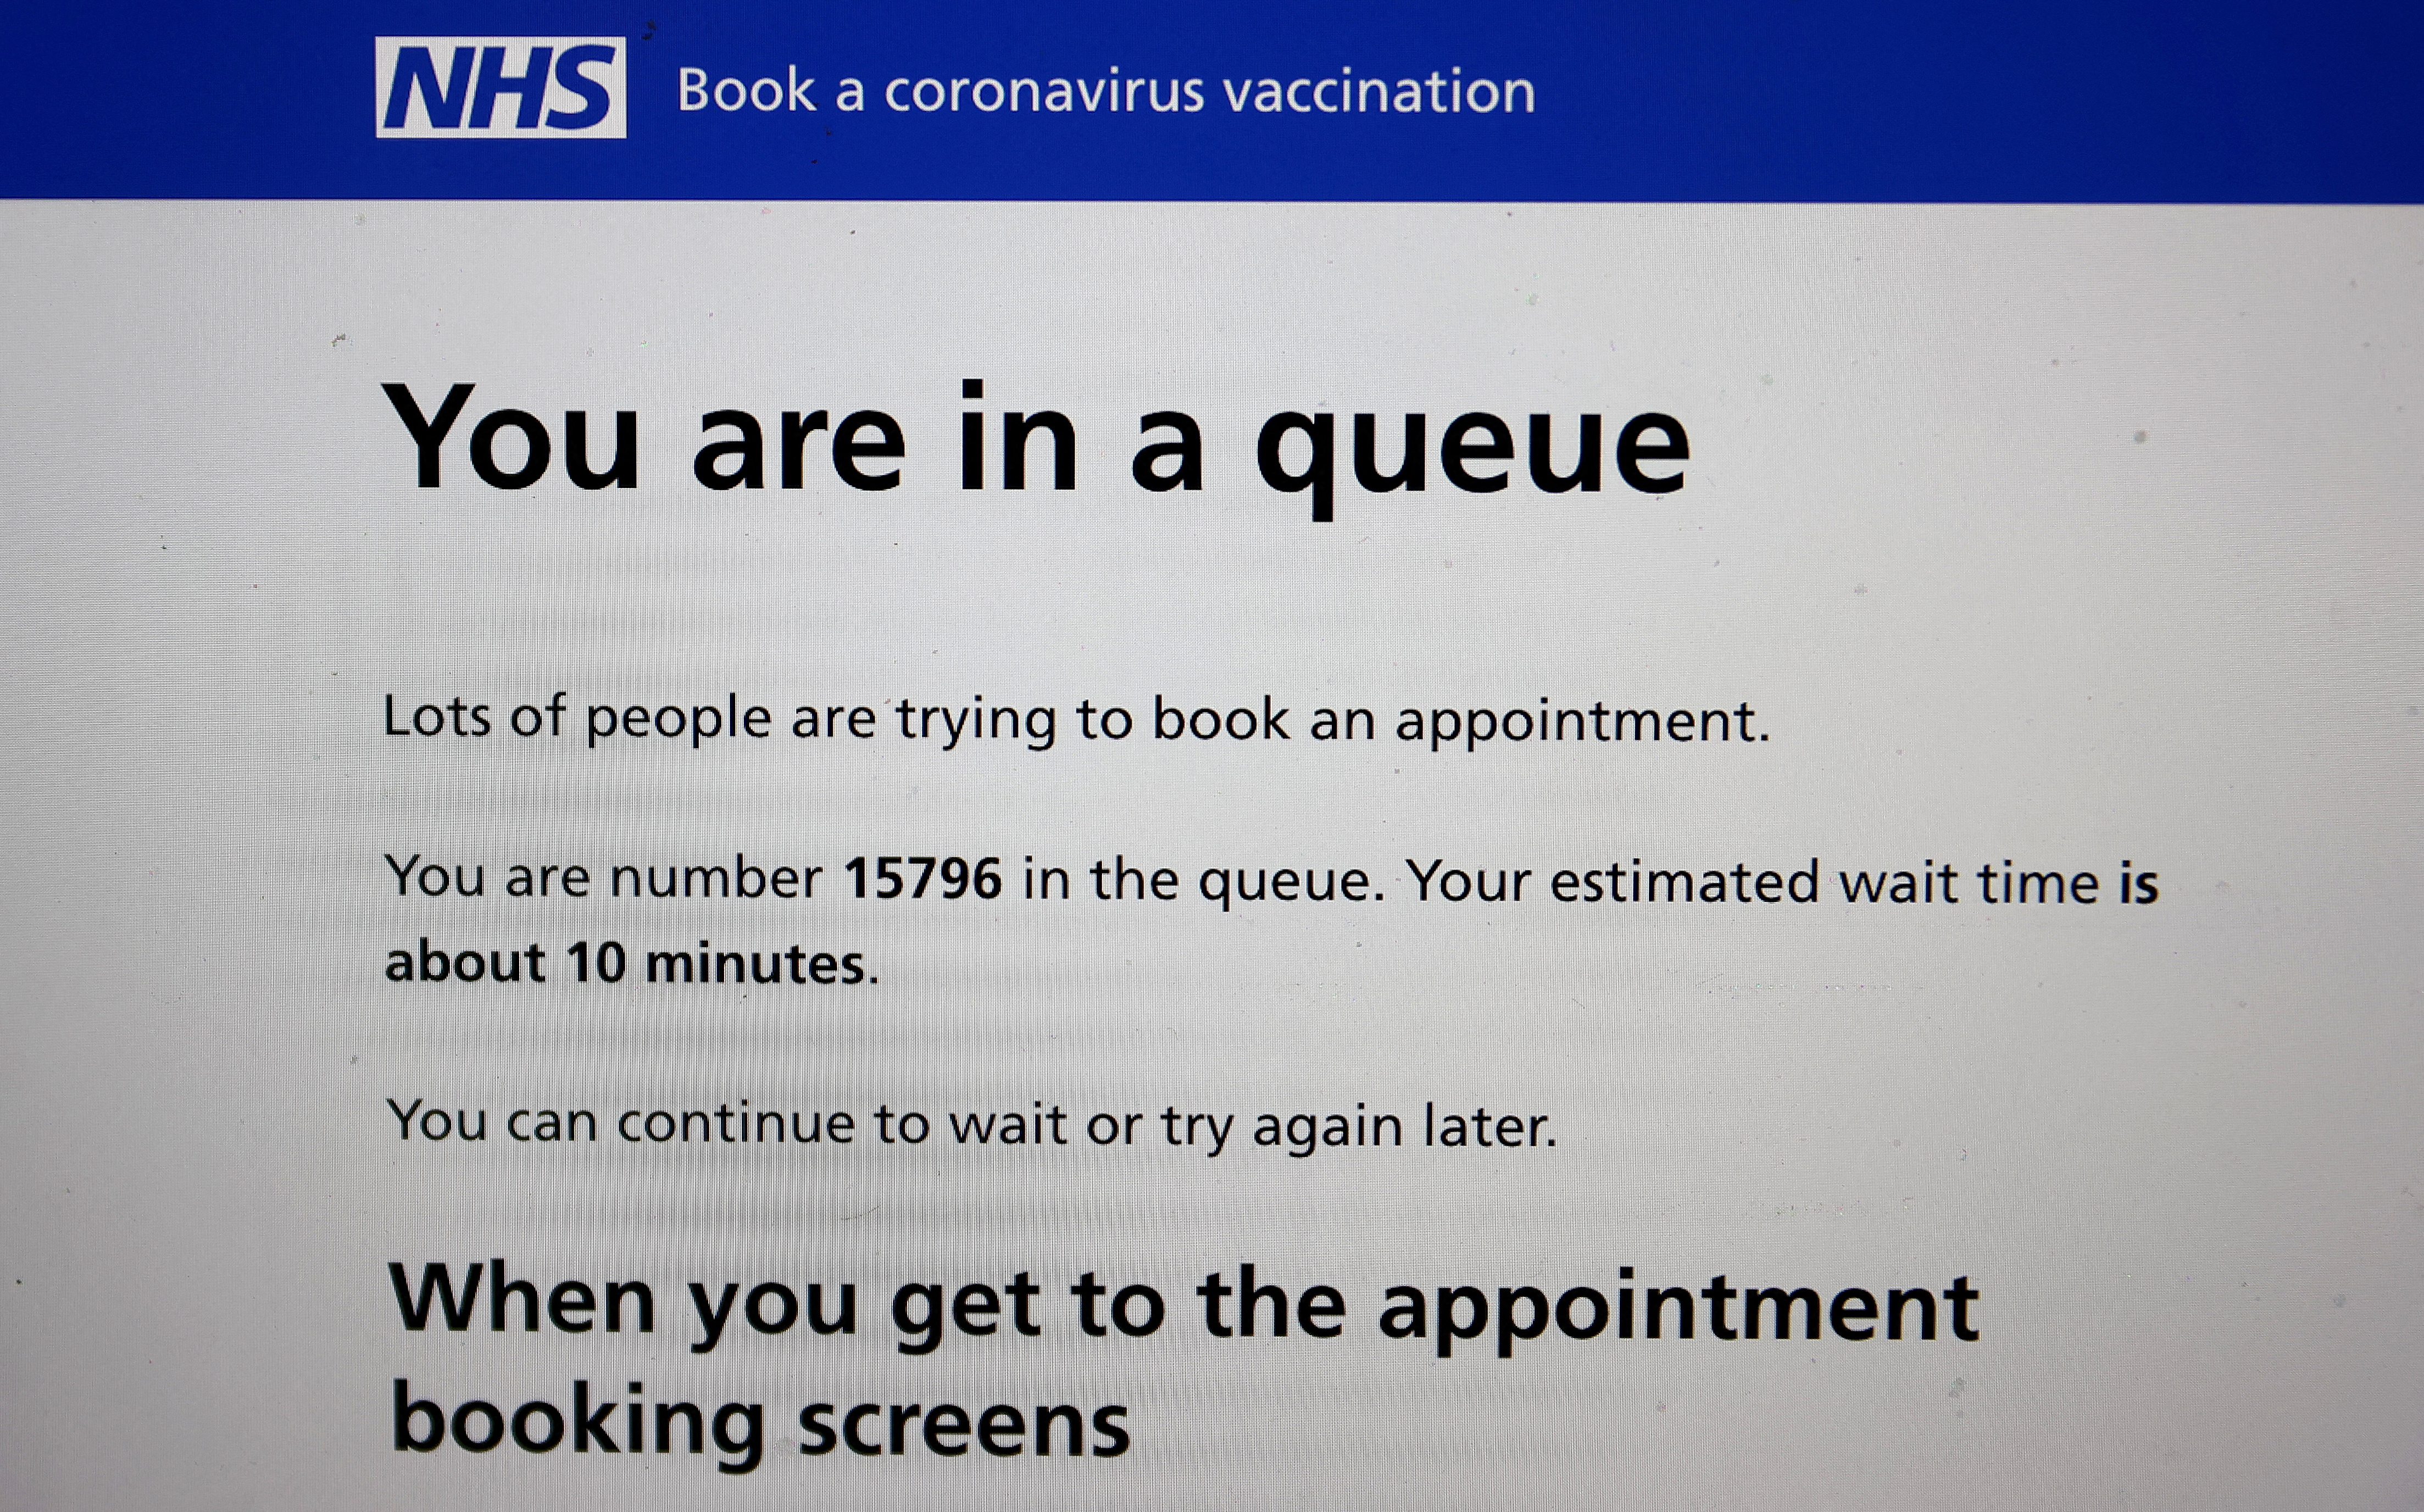 Photo illustration of a laptop screen showing information on NHS COVID-19 vaccination booking website